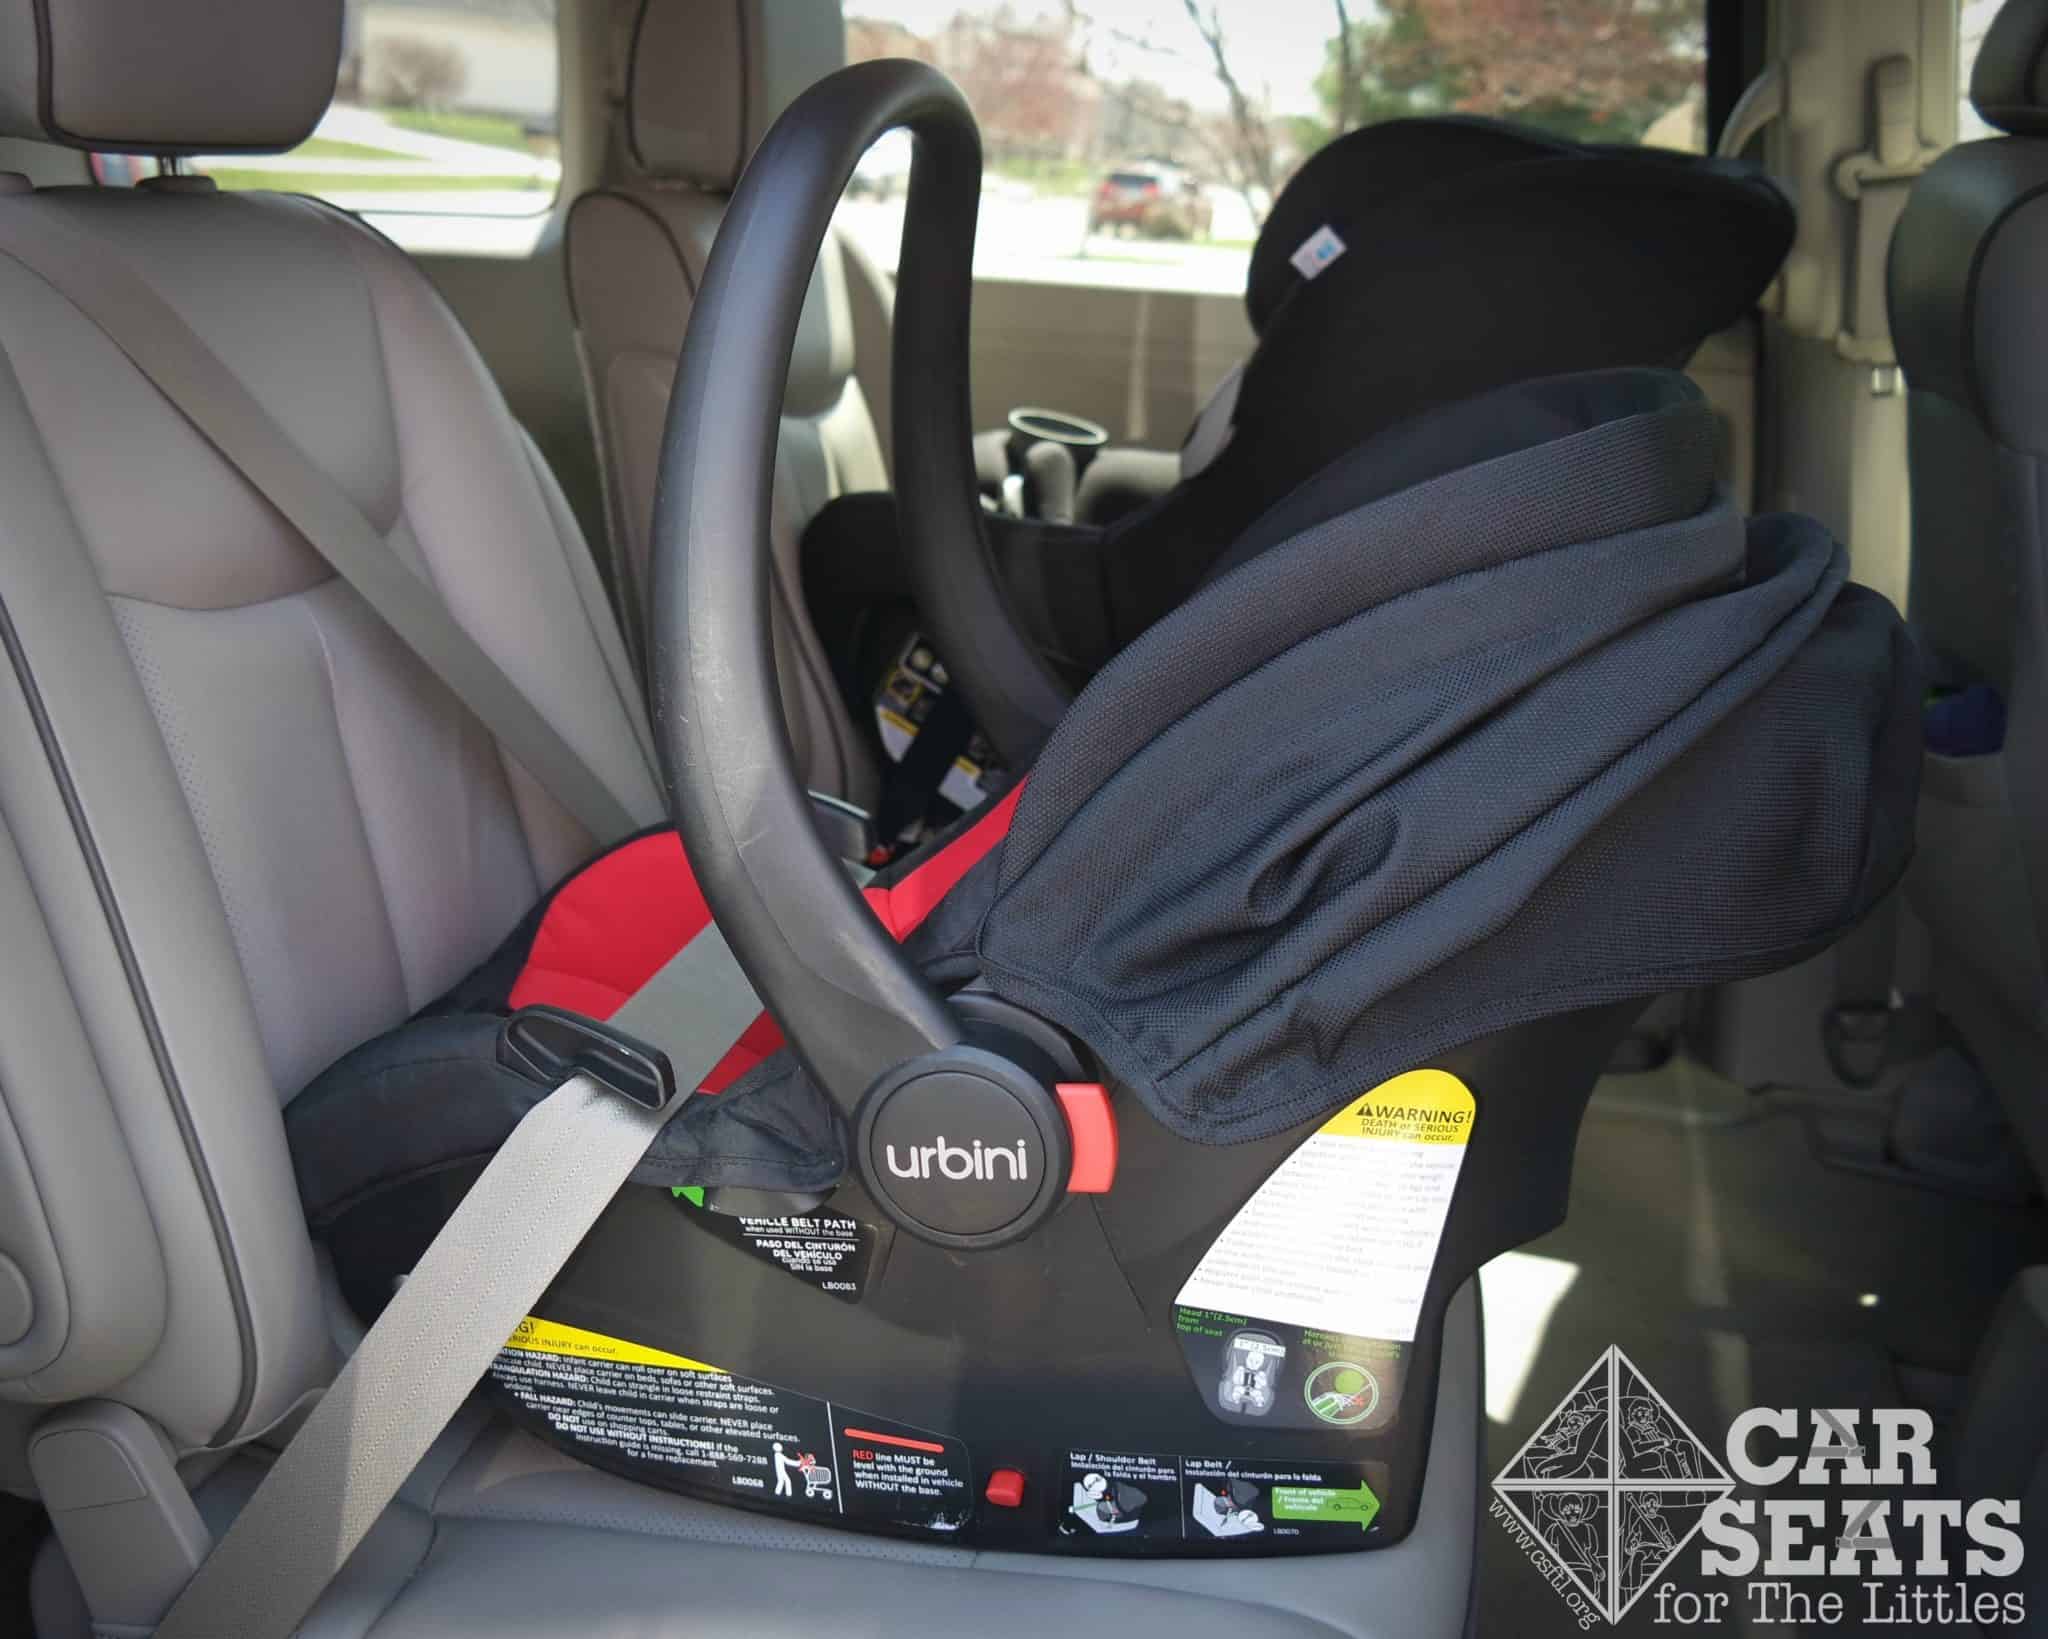 Rear Facing Only Seat Without The Base, How To Install Car Seats Properly